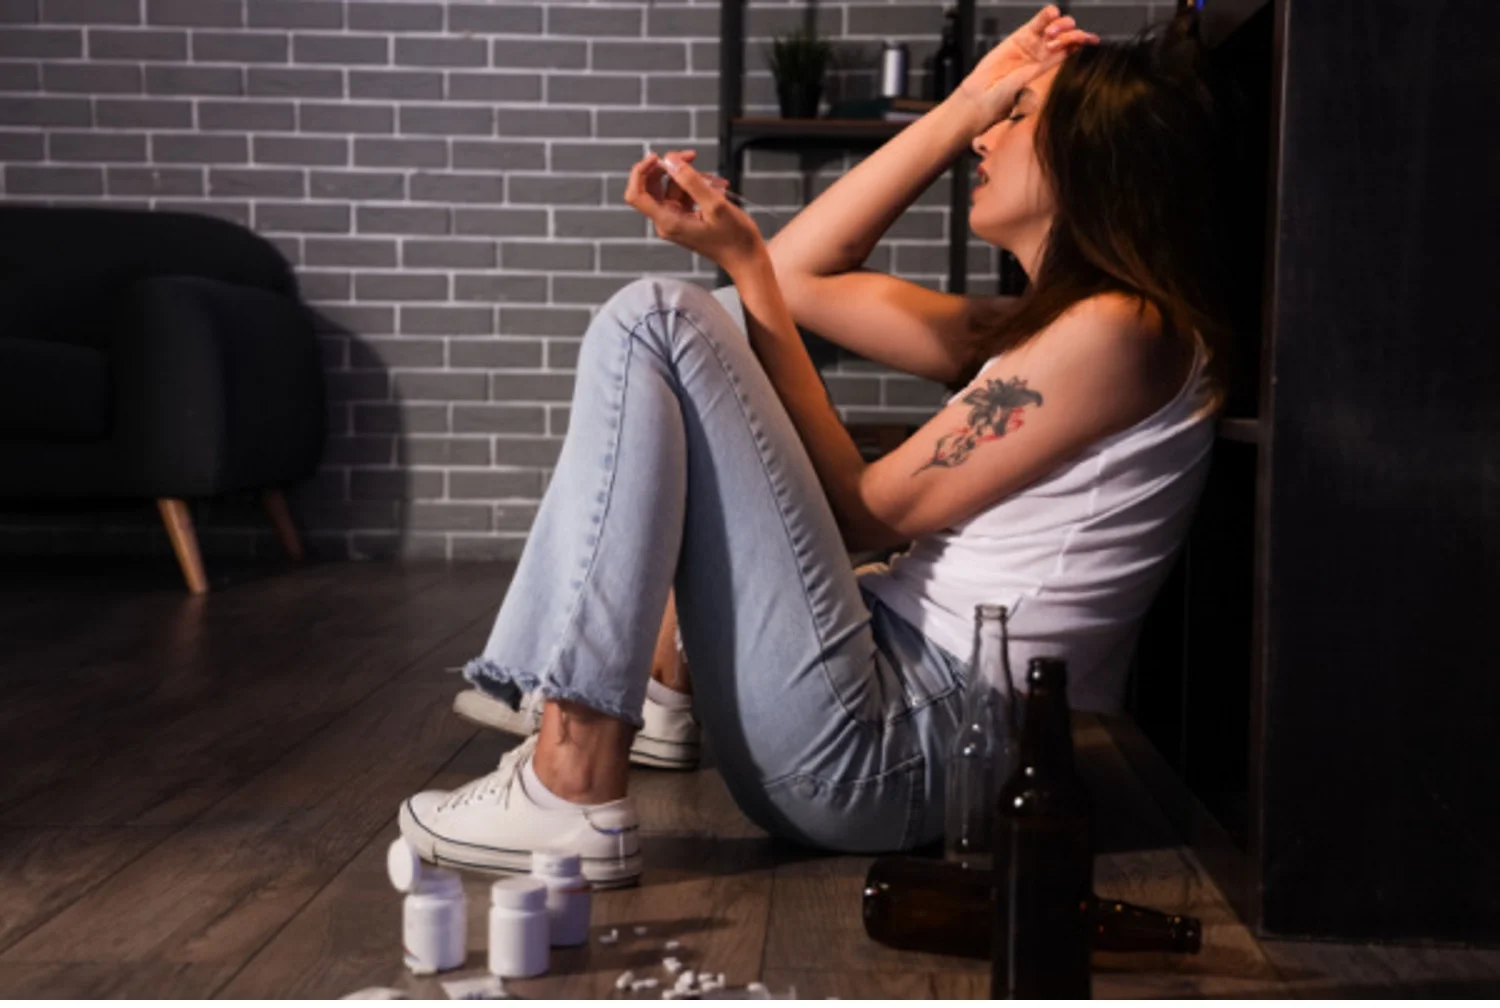 Young woman with BPD who is addicted to pills and alcohol sits on the floor looking distressed